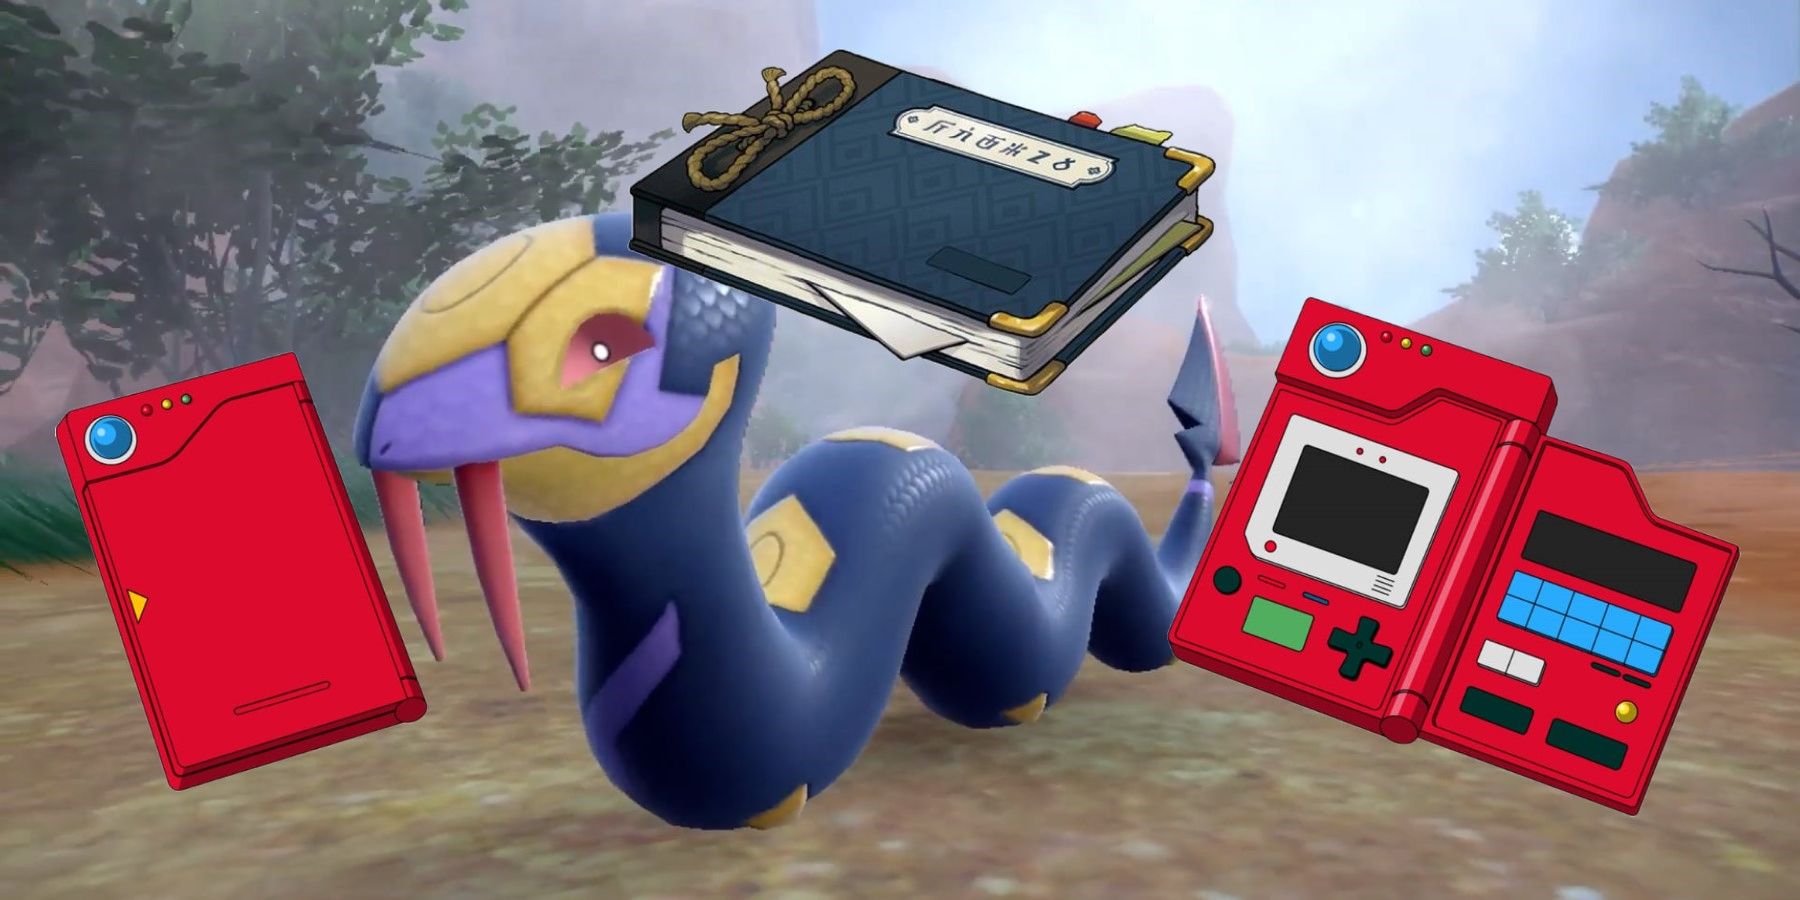 pokemon scarlet and violet pokedex entries issues implausible facts discrepancy between descriptions stats abilities moves purugly latios latias magcargo gardevoir chesnaught magikarp